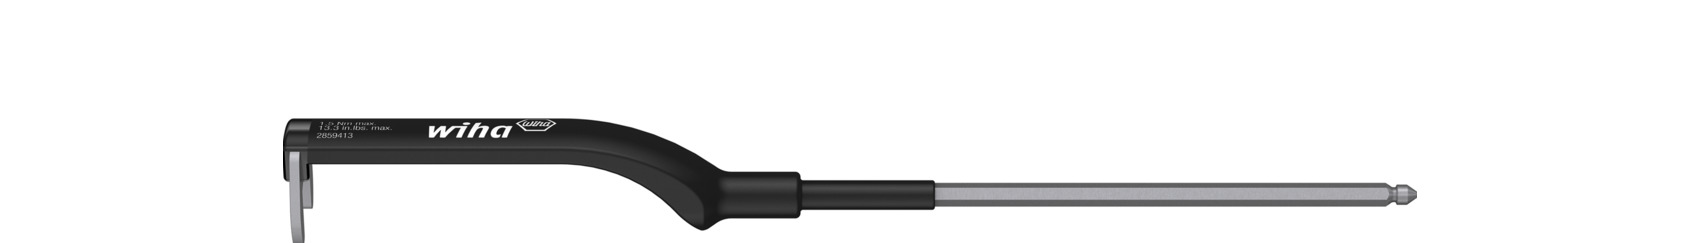 Cable Key for Circular Plug Connector, Hexagon Head for Torque Screwdriver with Long Handle